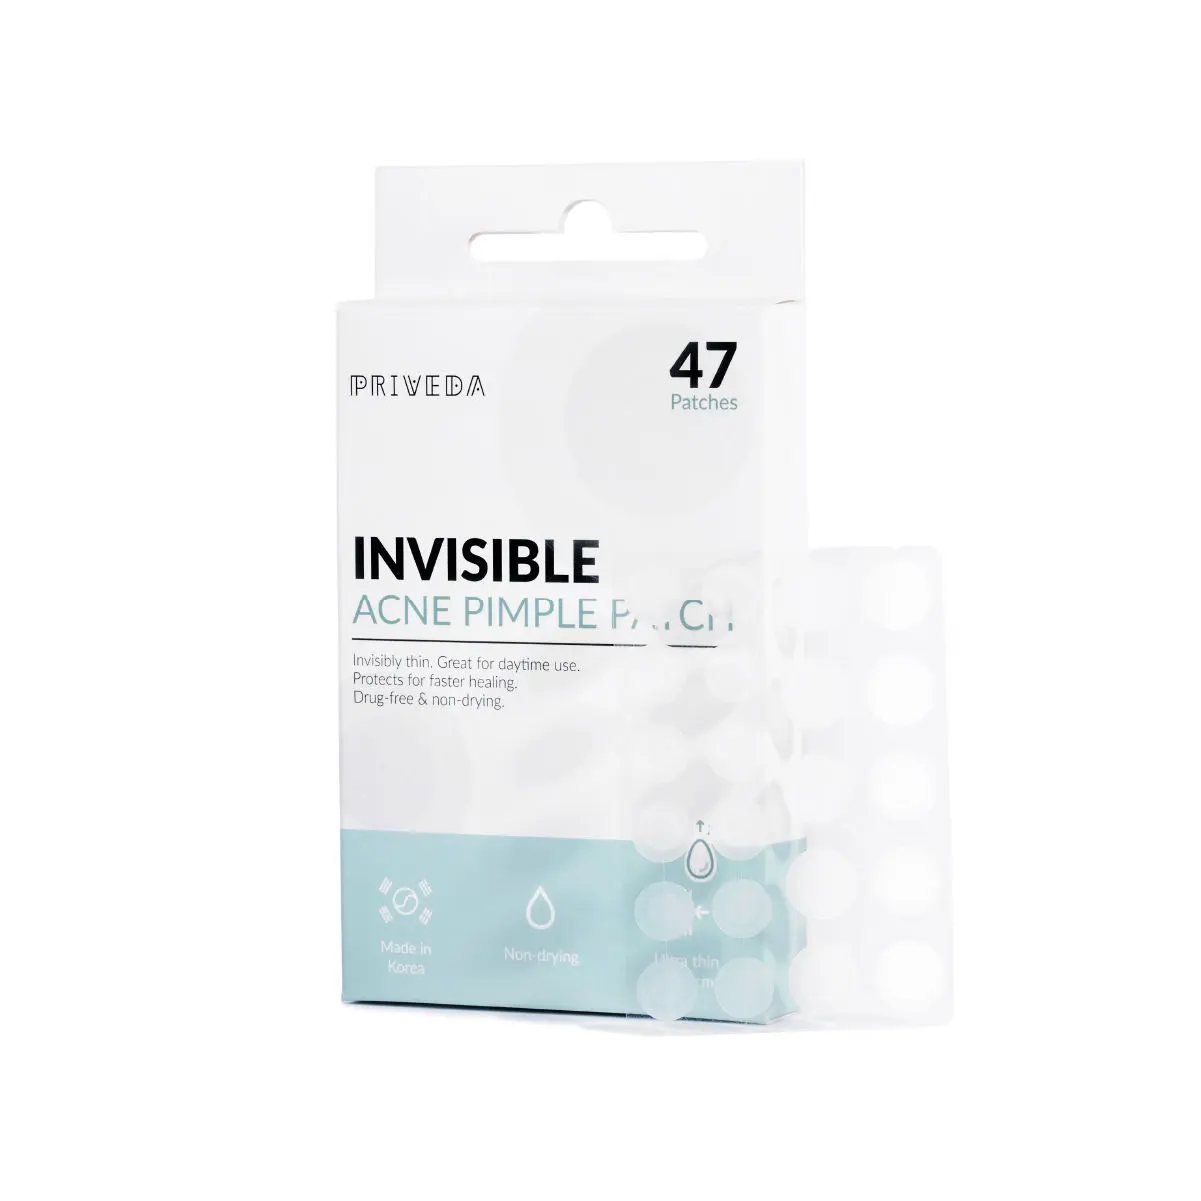 PRIVEDA Invisible Acne Pimple Patch 47 Units 